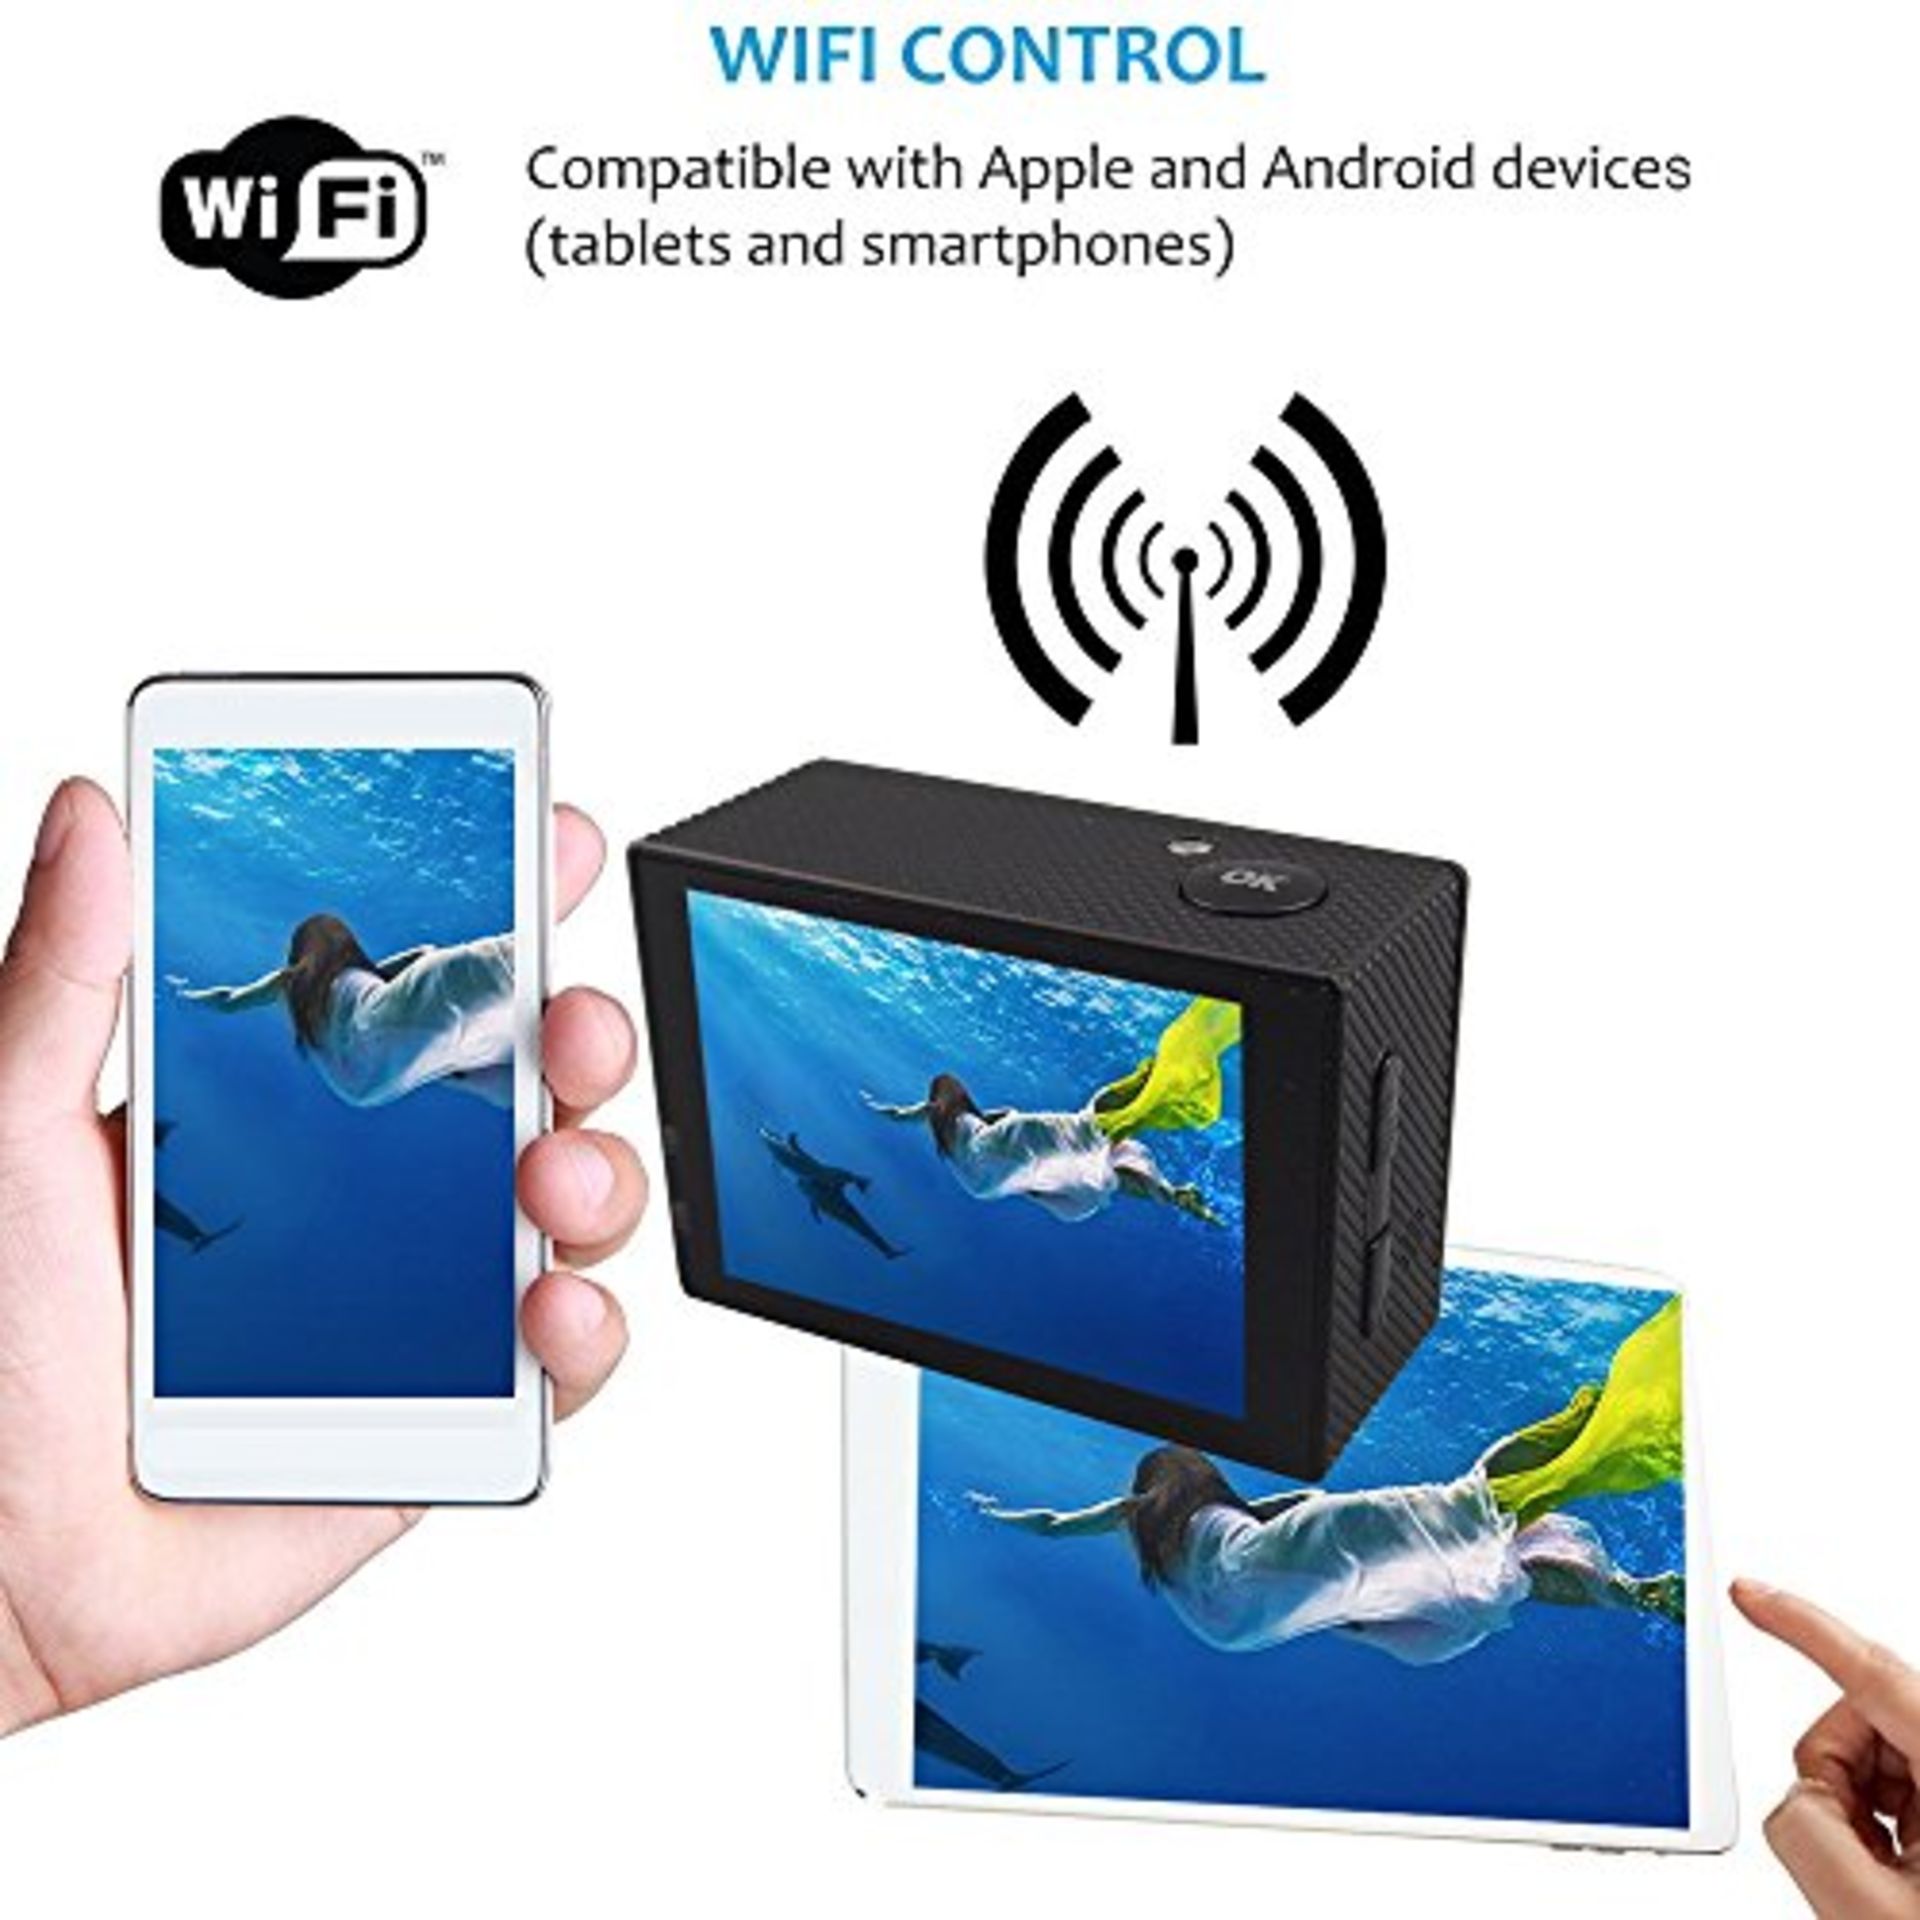 No VAT Brand New Full Ultra HD 4K Waterproof WiFi Action Camera With Audio - Box And Accessories - - Image 2 of 2